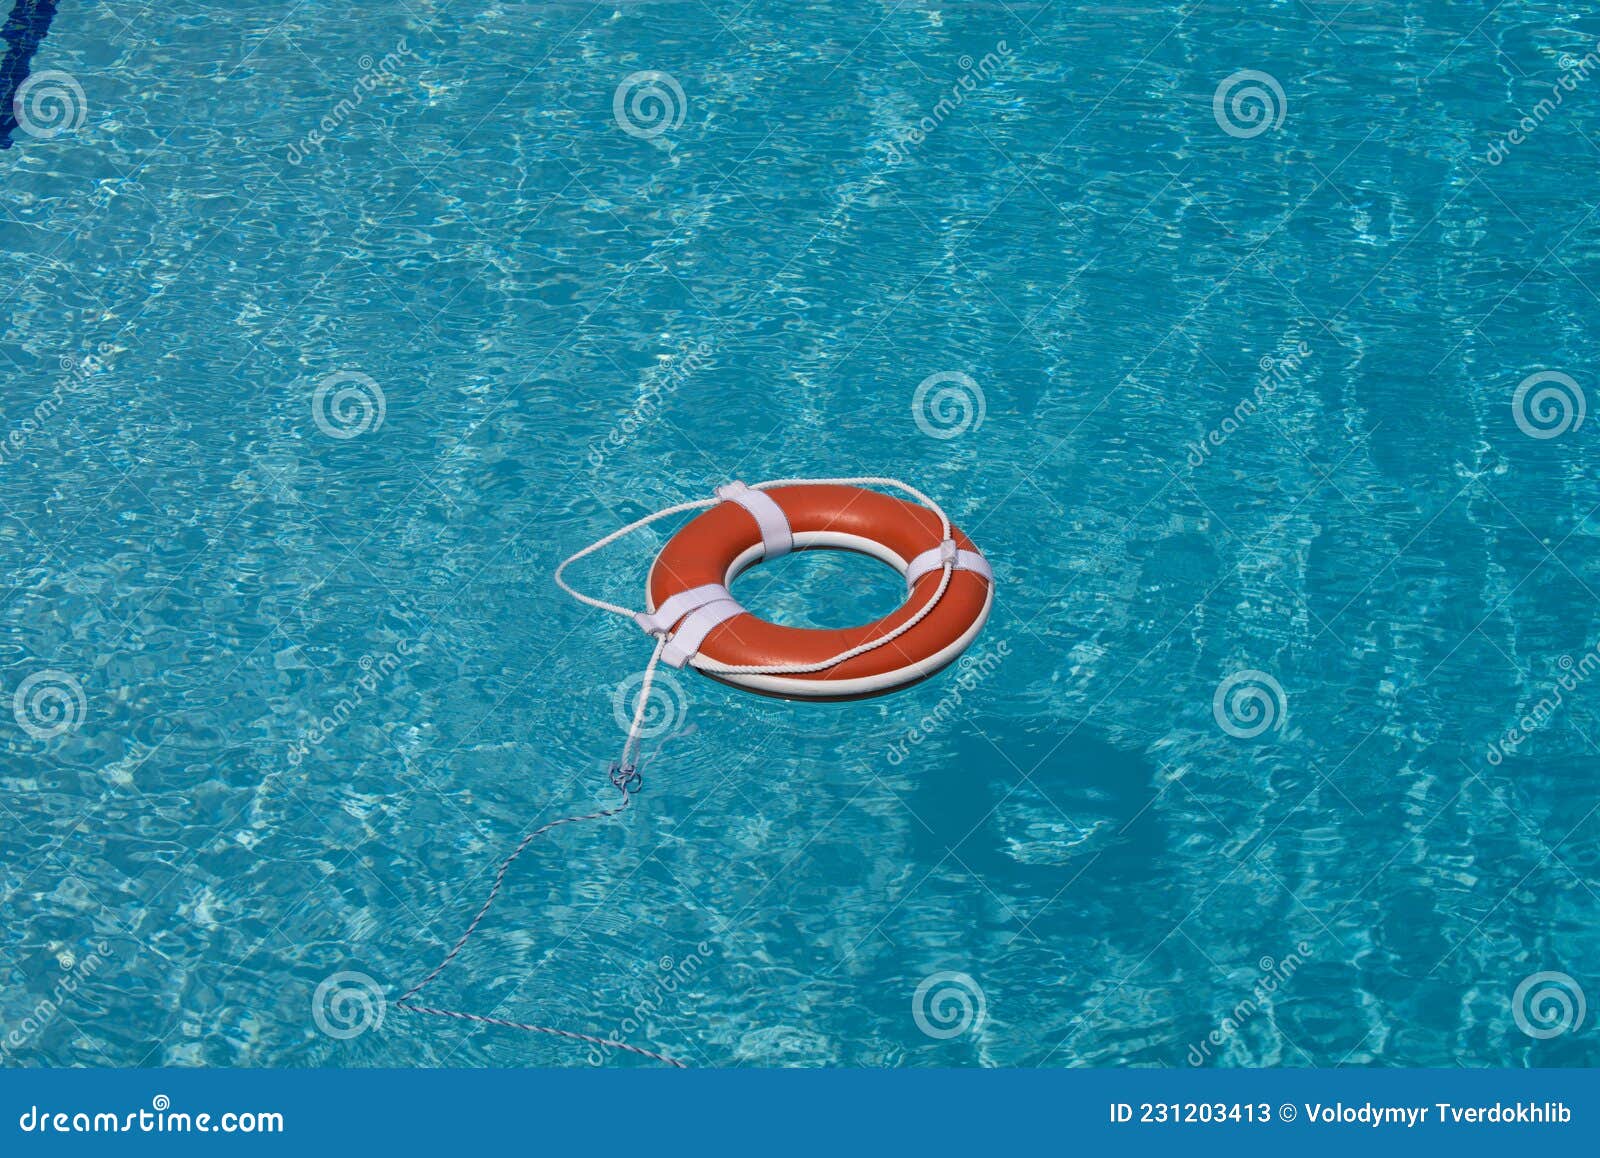 Lifebuoy in Swimming Pool. Summer Vacation Concept. Life Buoy in Water ...